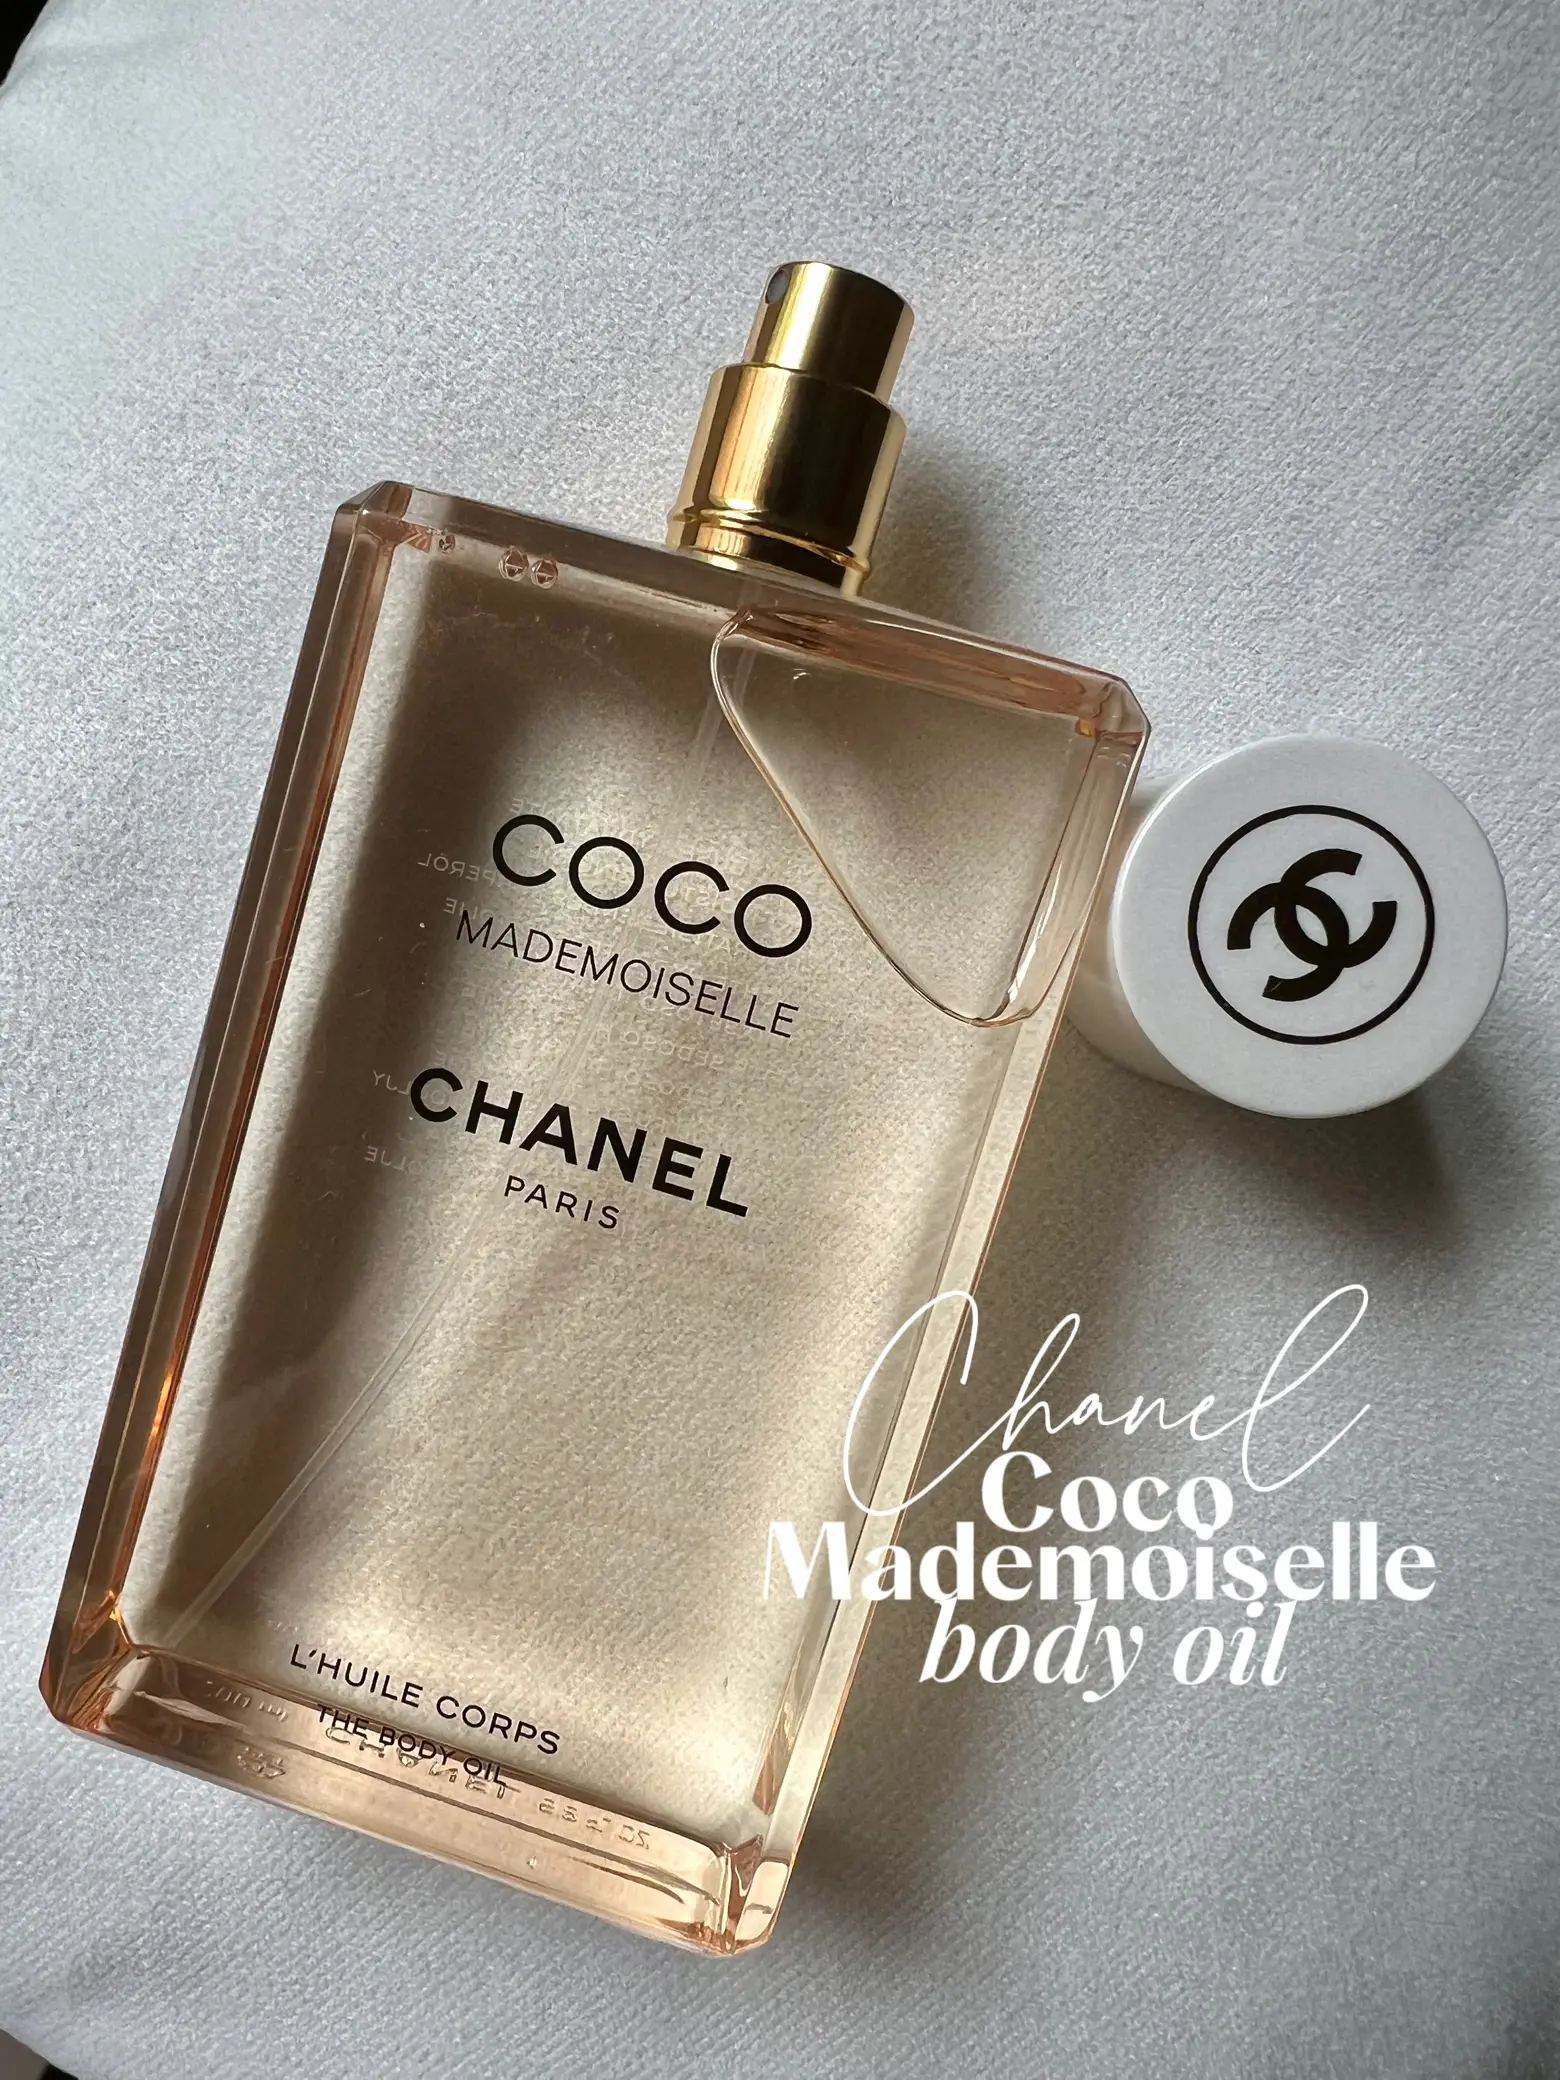 mademoiselle coco chanel body oil for women